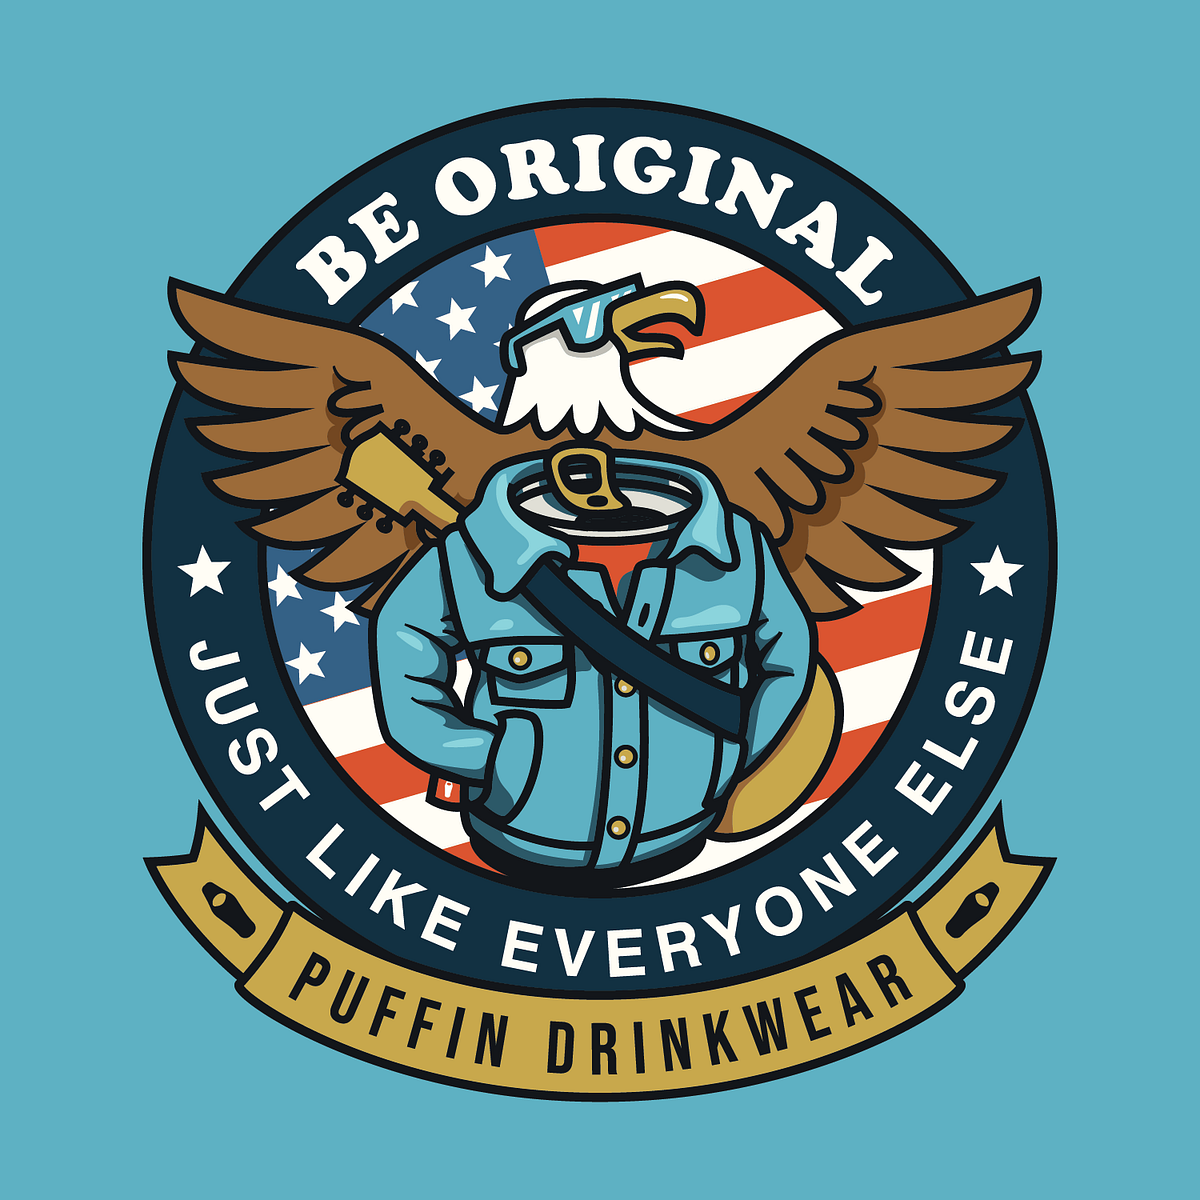 Puffin Drinkwear Sticker Series by Electric Graphic Design on Dribbble